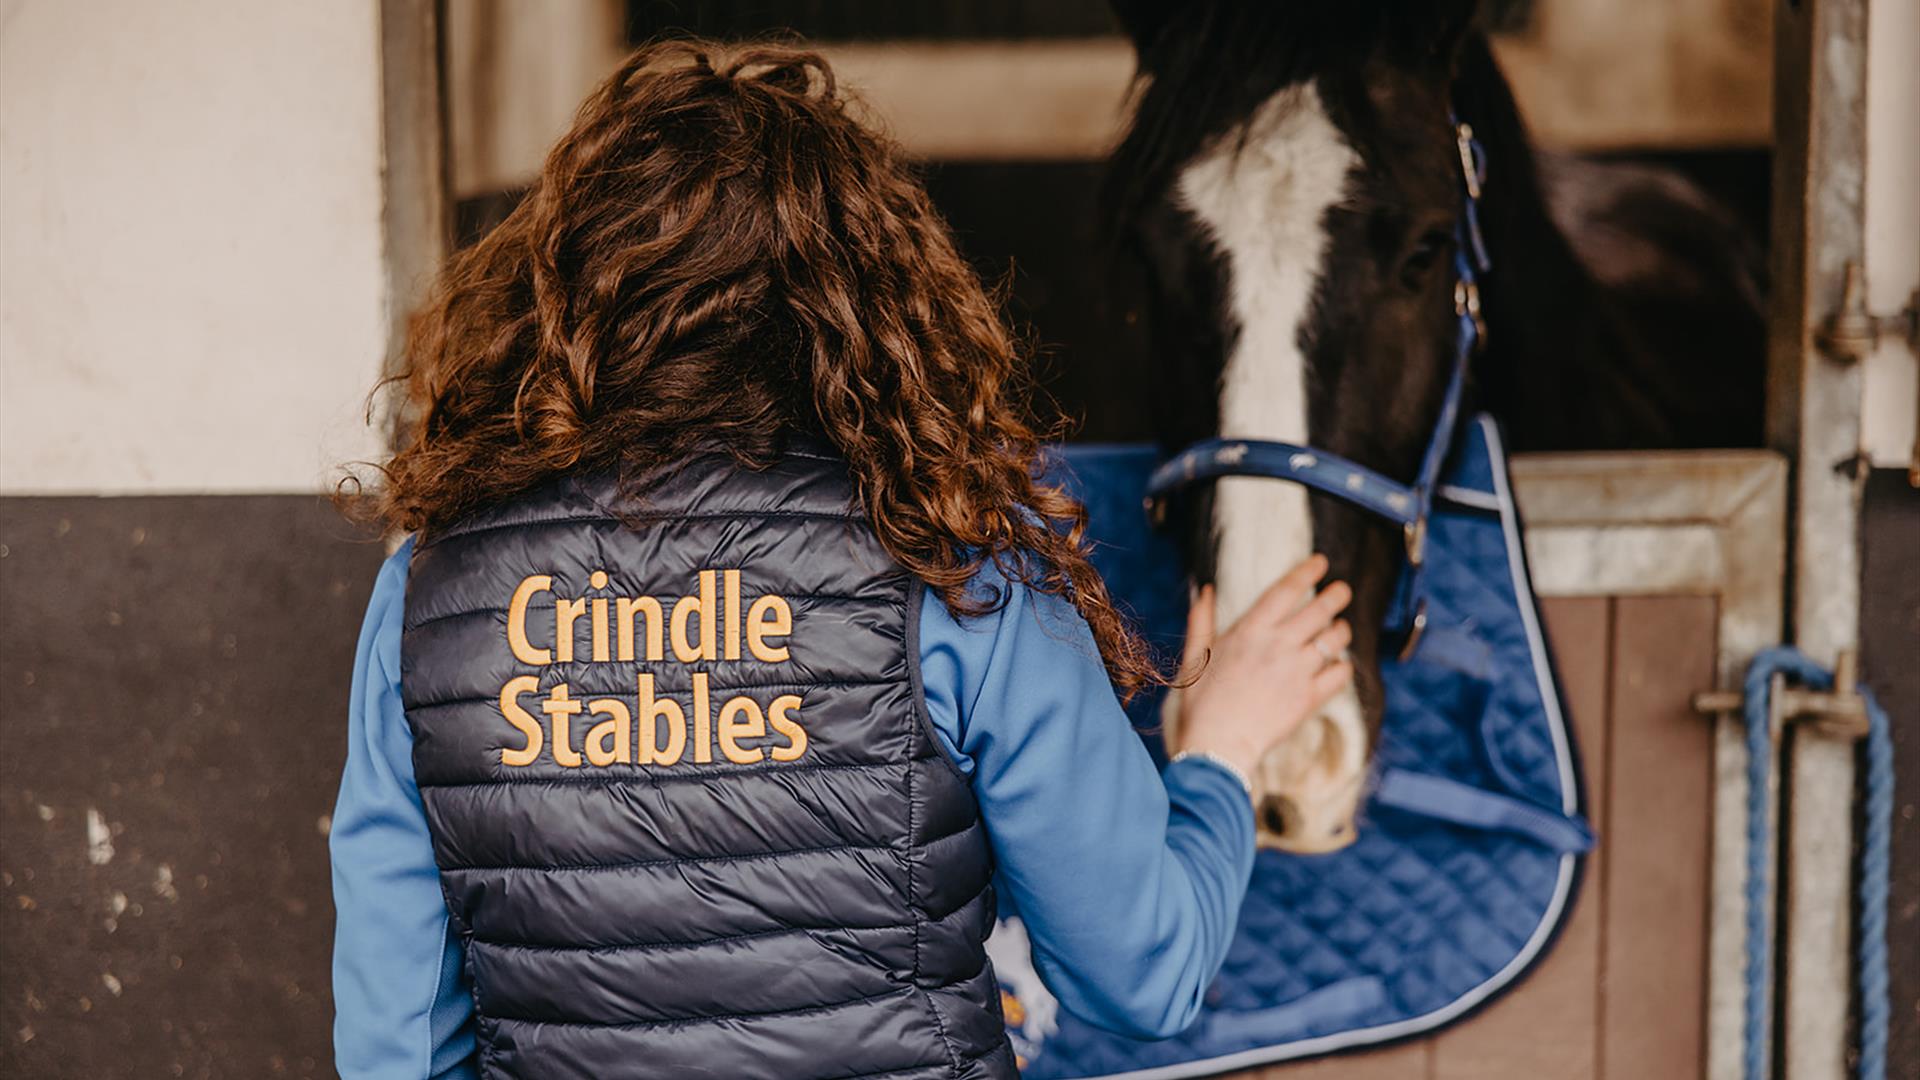 Crindle Stables